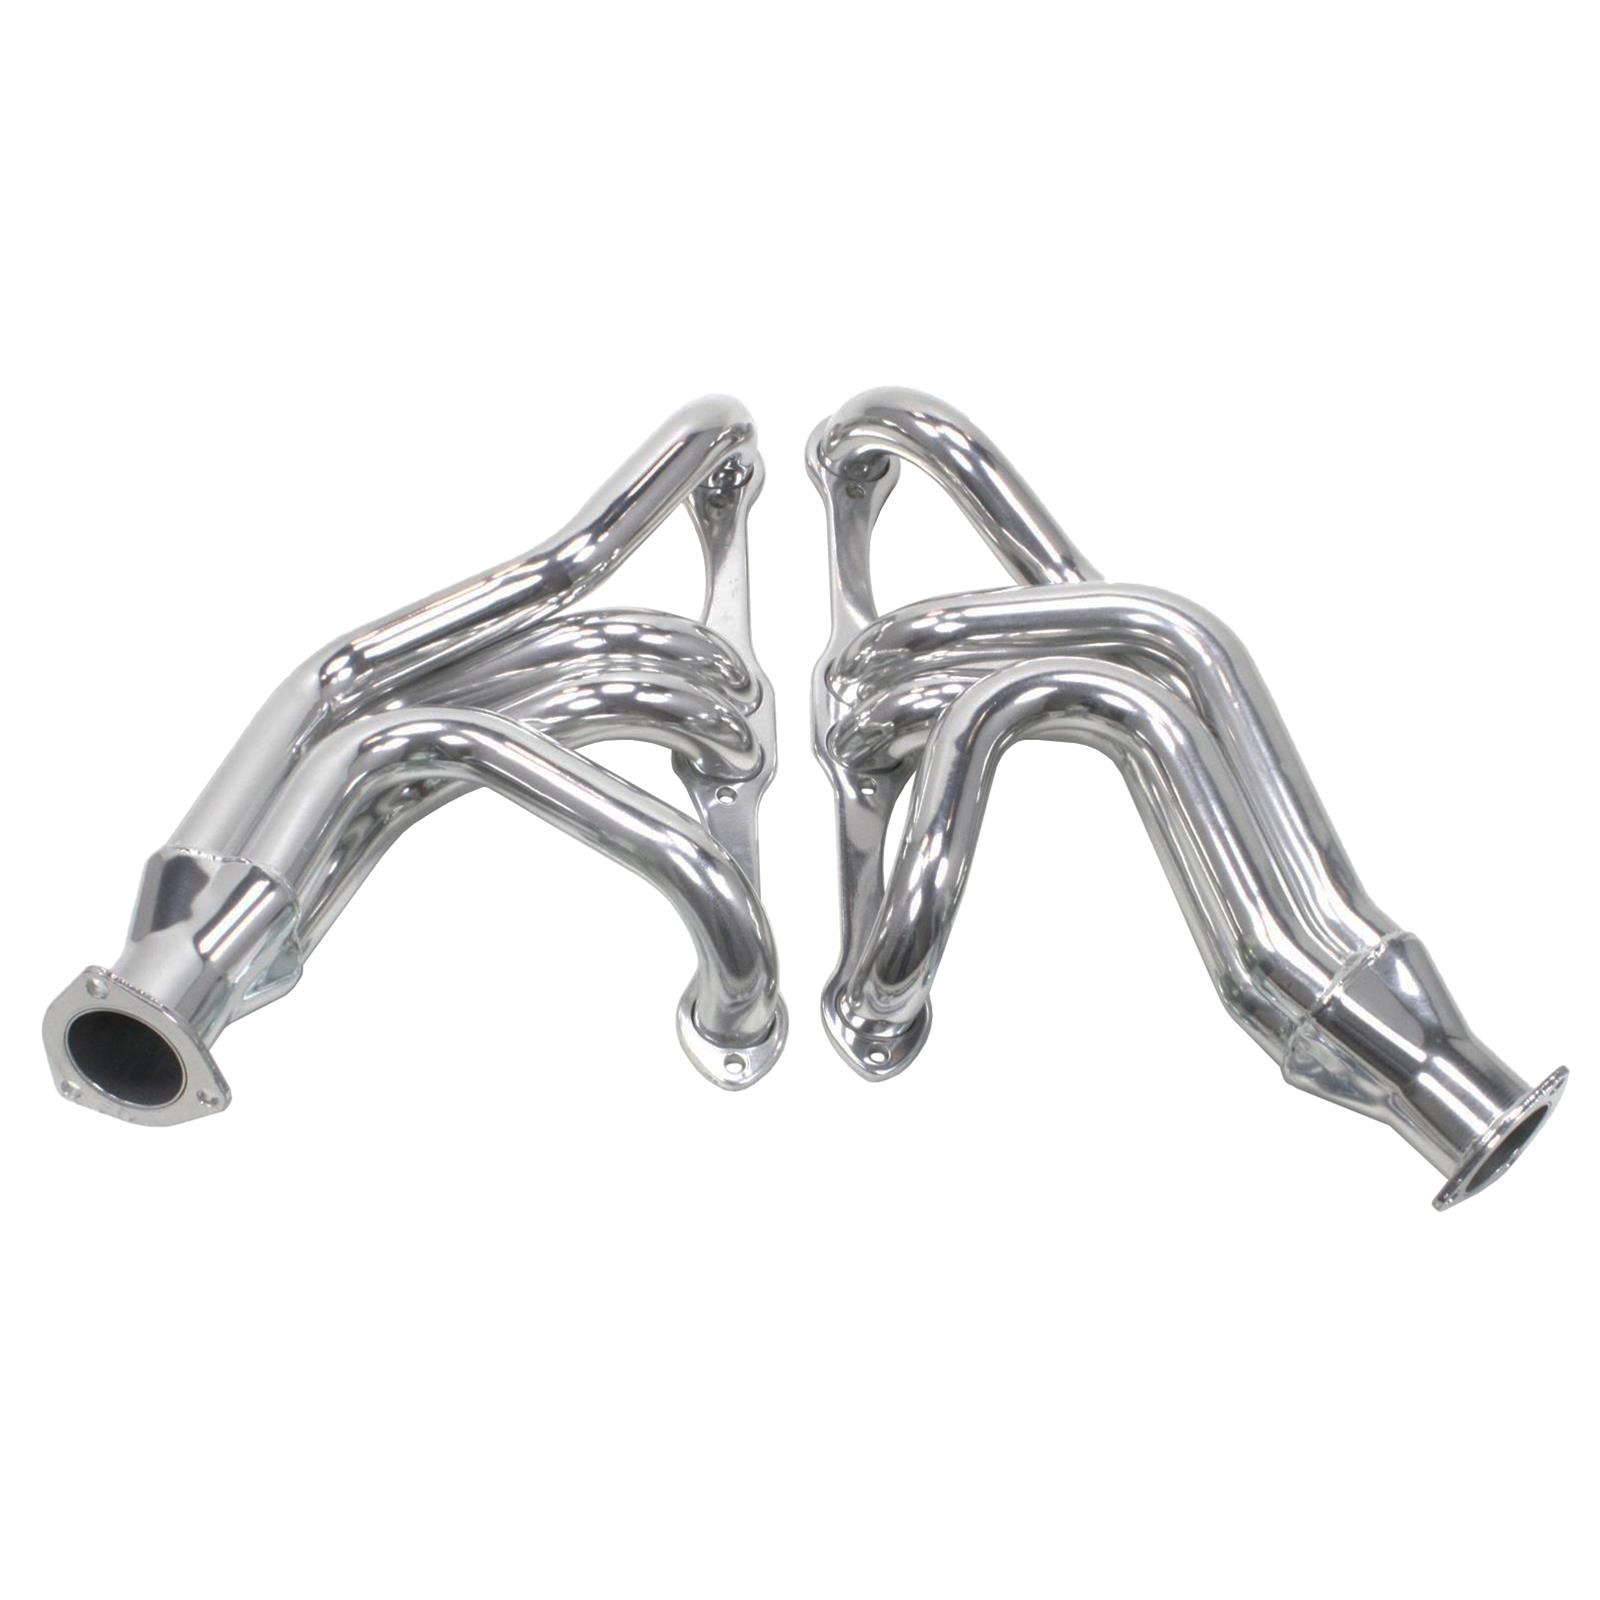 1955-56-57 CHEVY SMALL BLOCK CHEVY SHORTY HEADERS CERAMIC COATED 